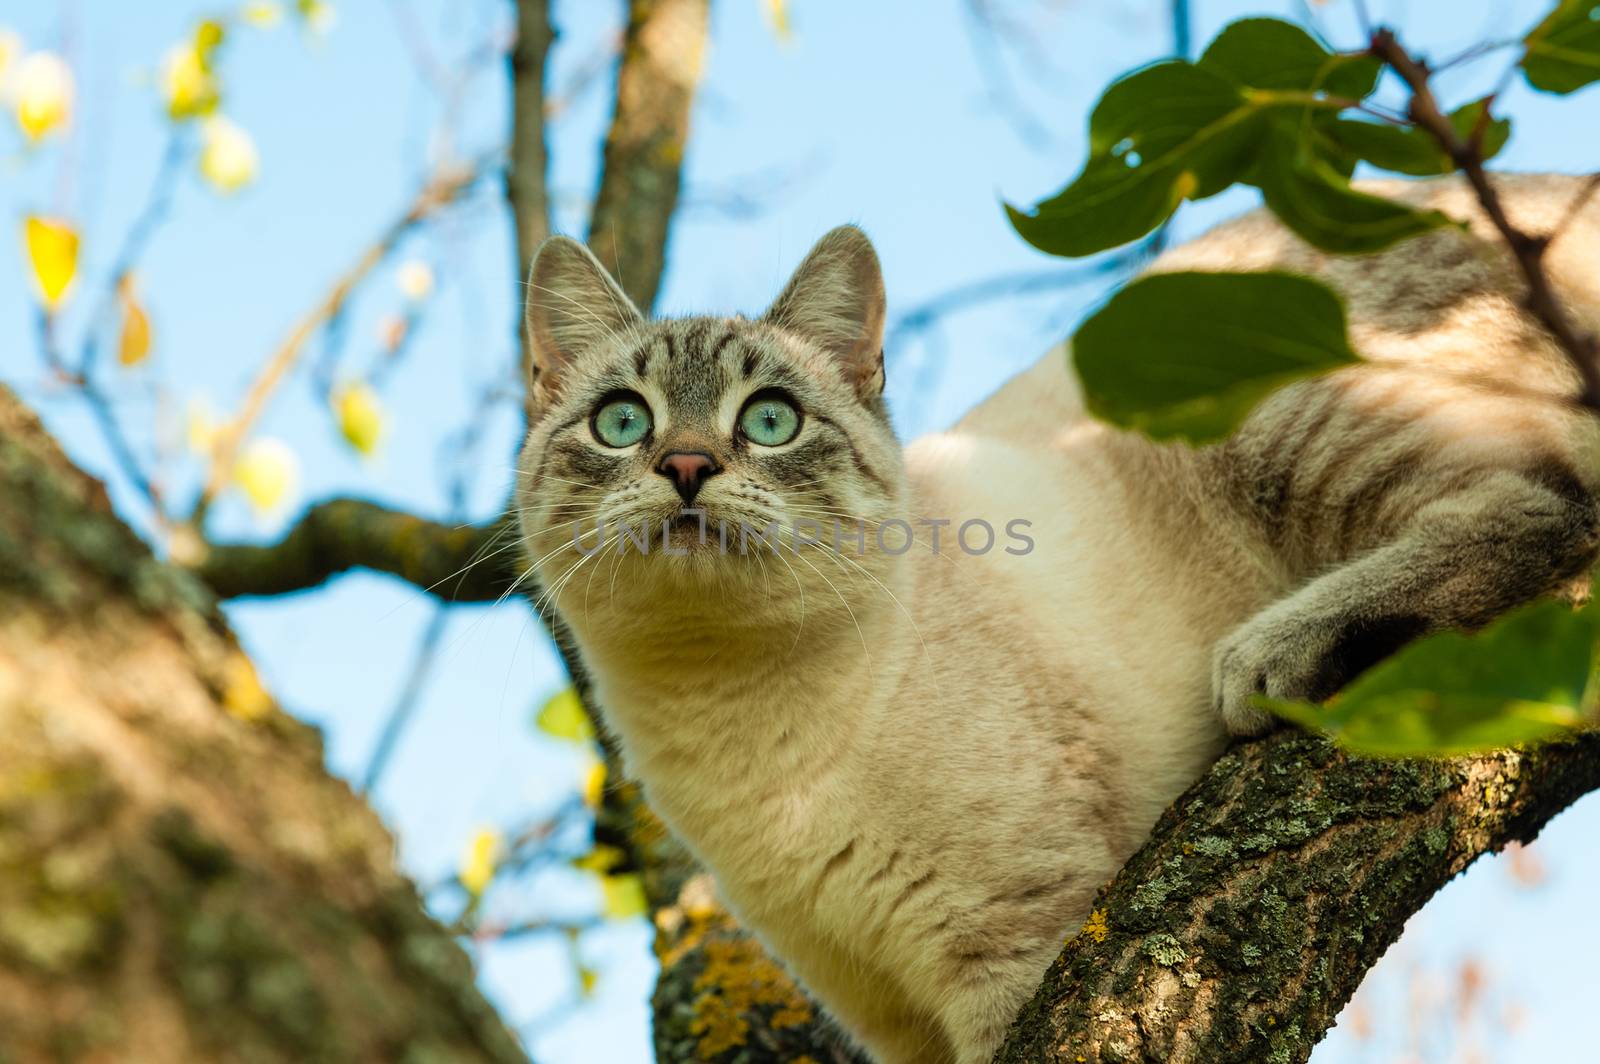 The eyes of a hunter cat who saw a bird sitting on a nearby bran by ben44